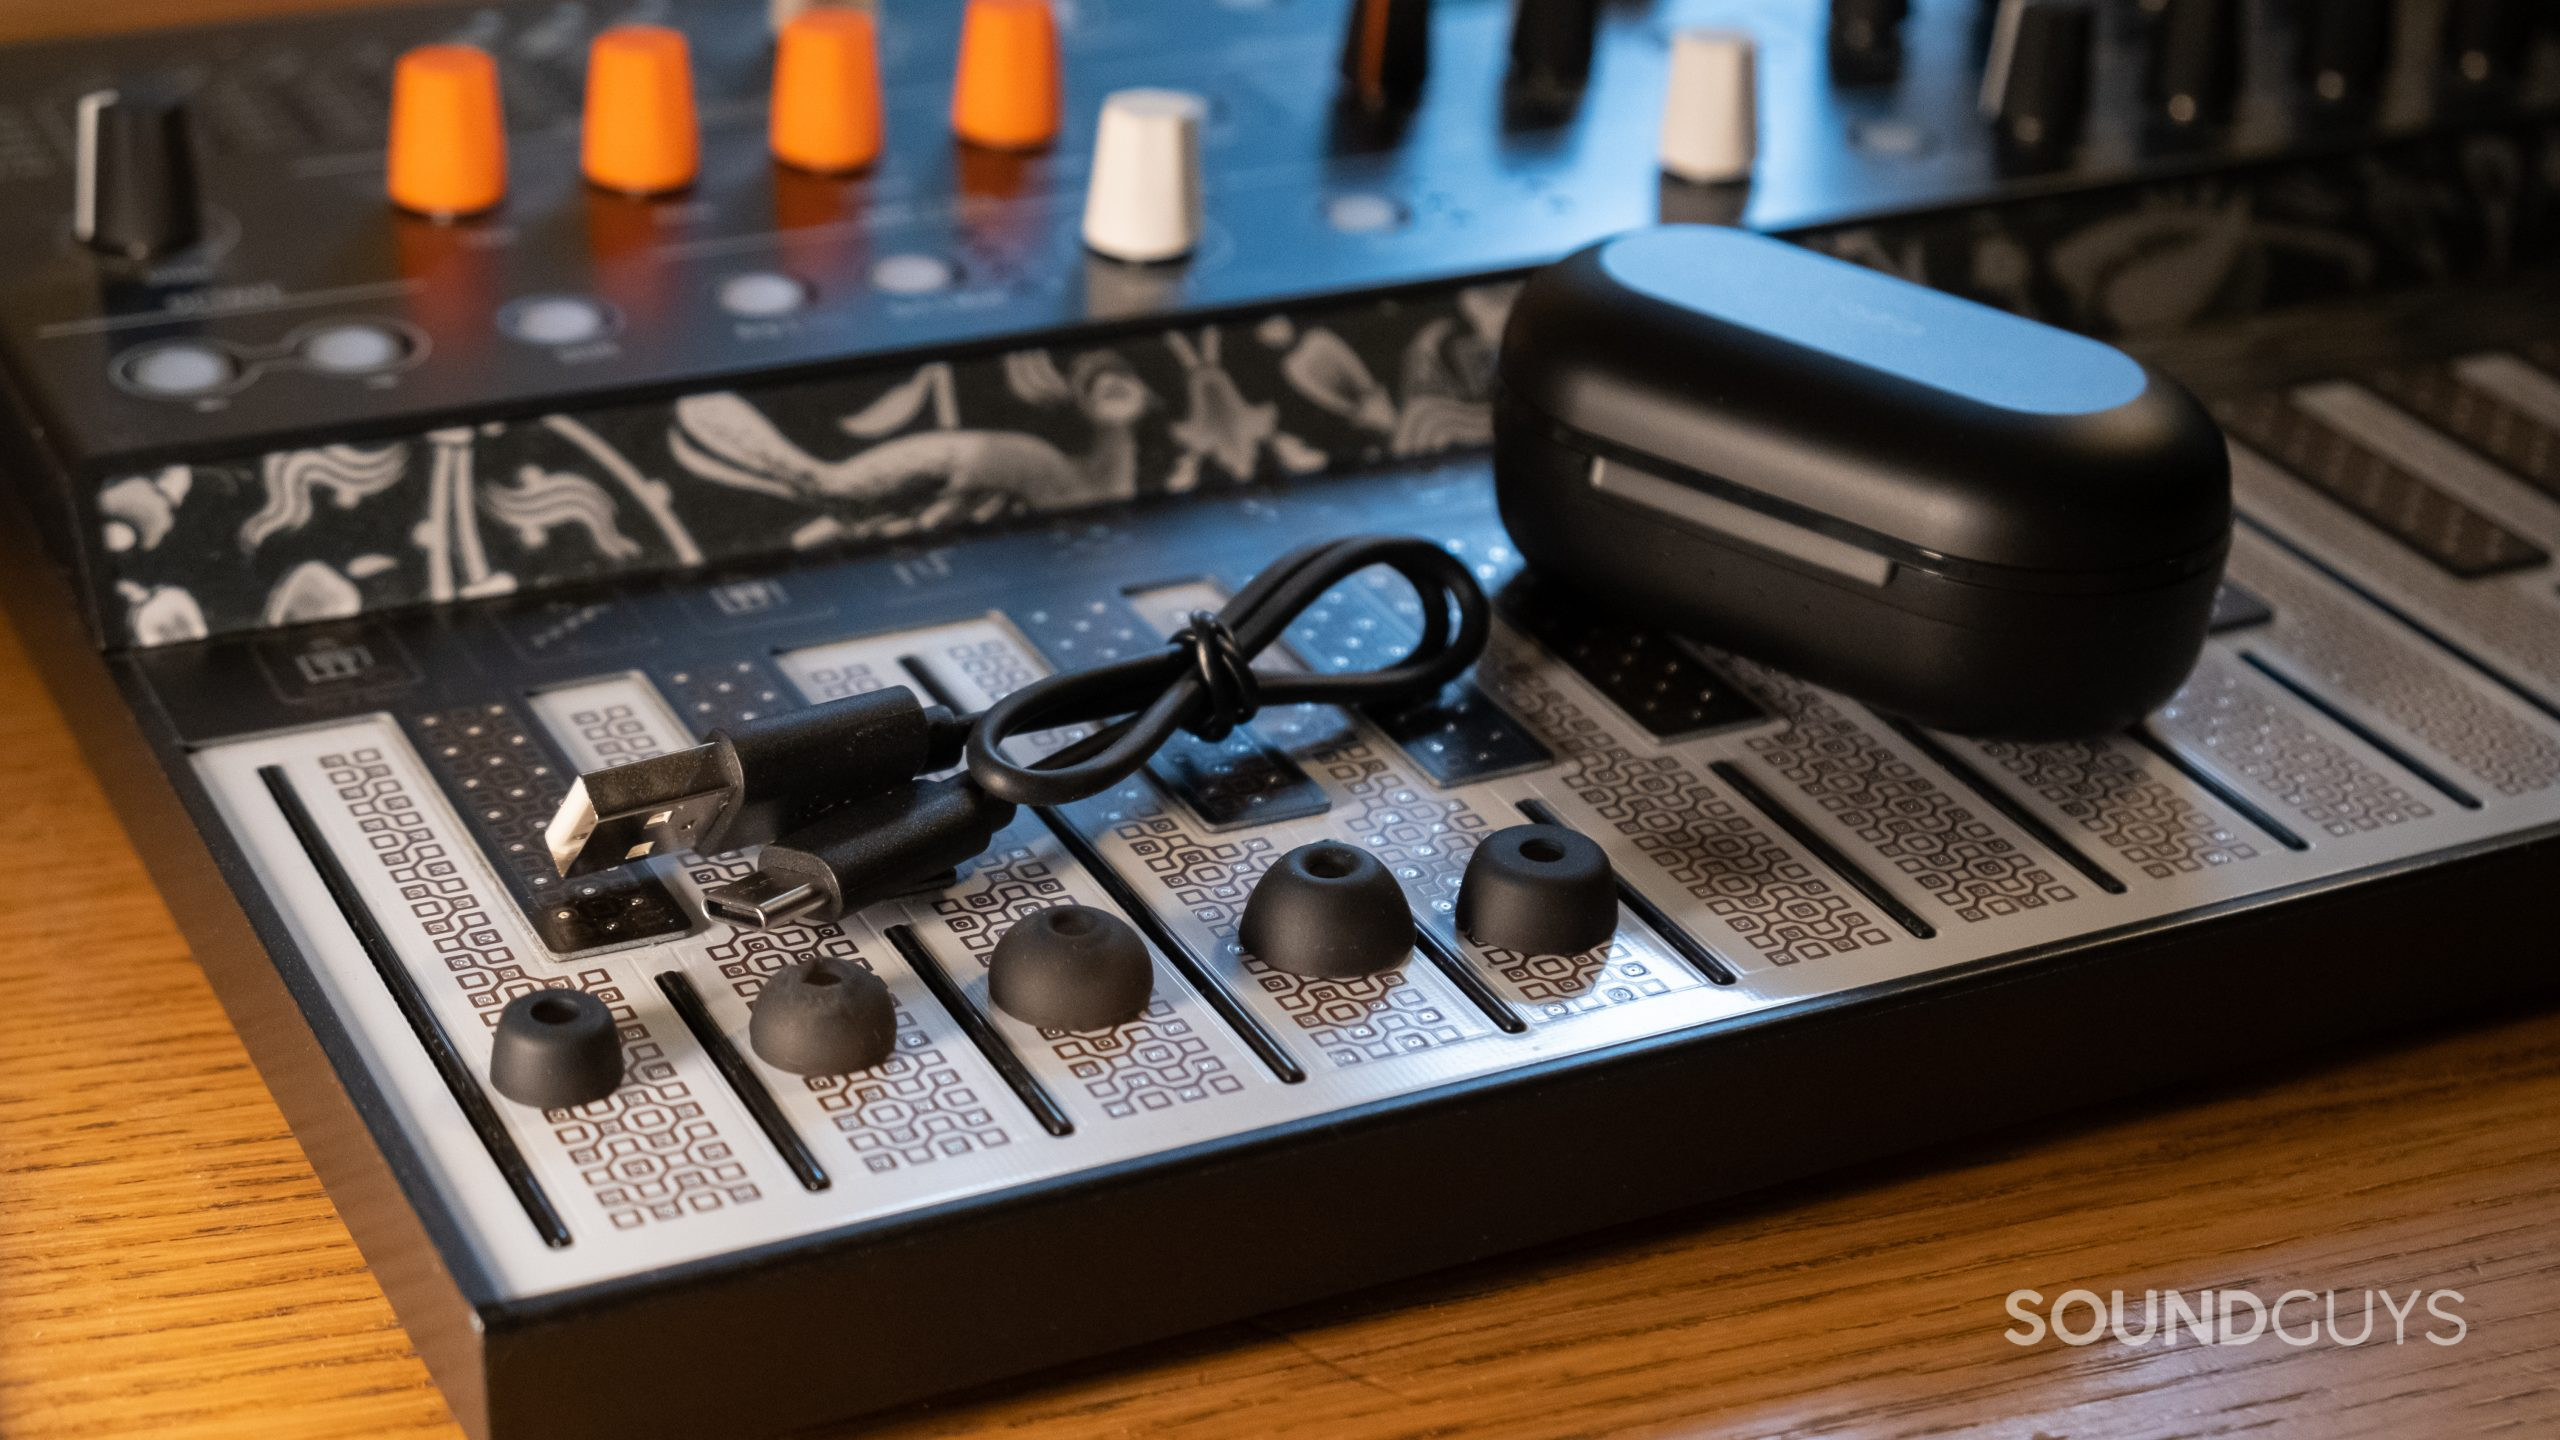 On a synthesizer keyboard rest the ear tips, USB-C cables, and case of the TOZO NC9.